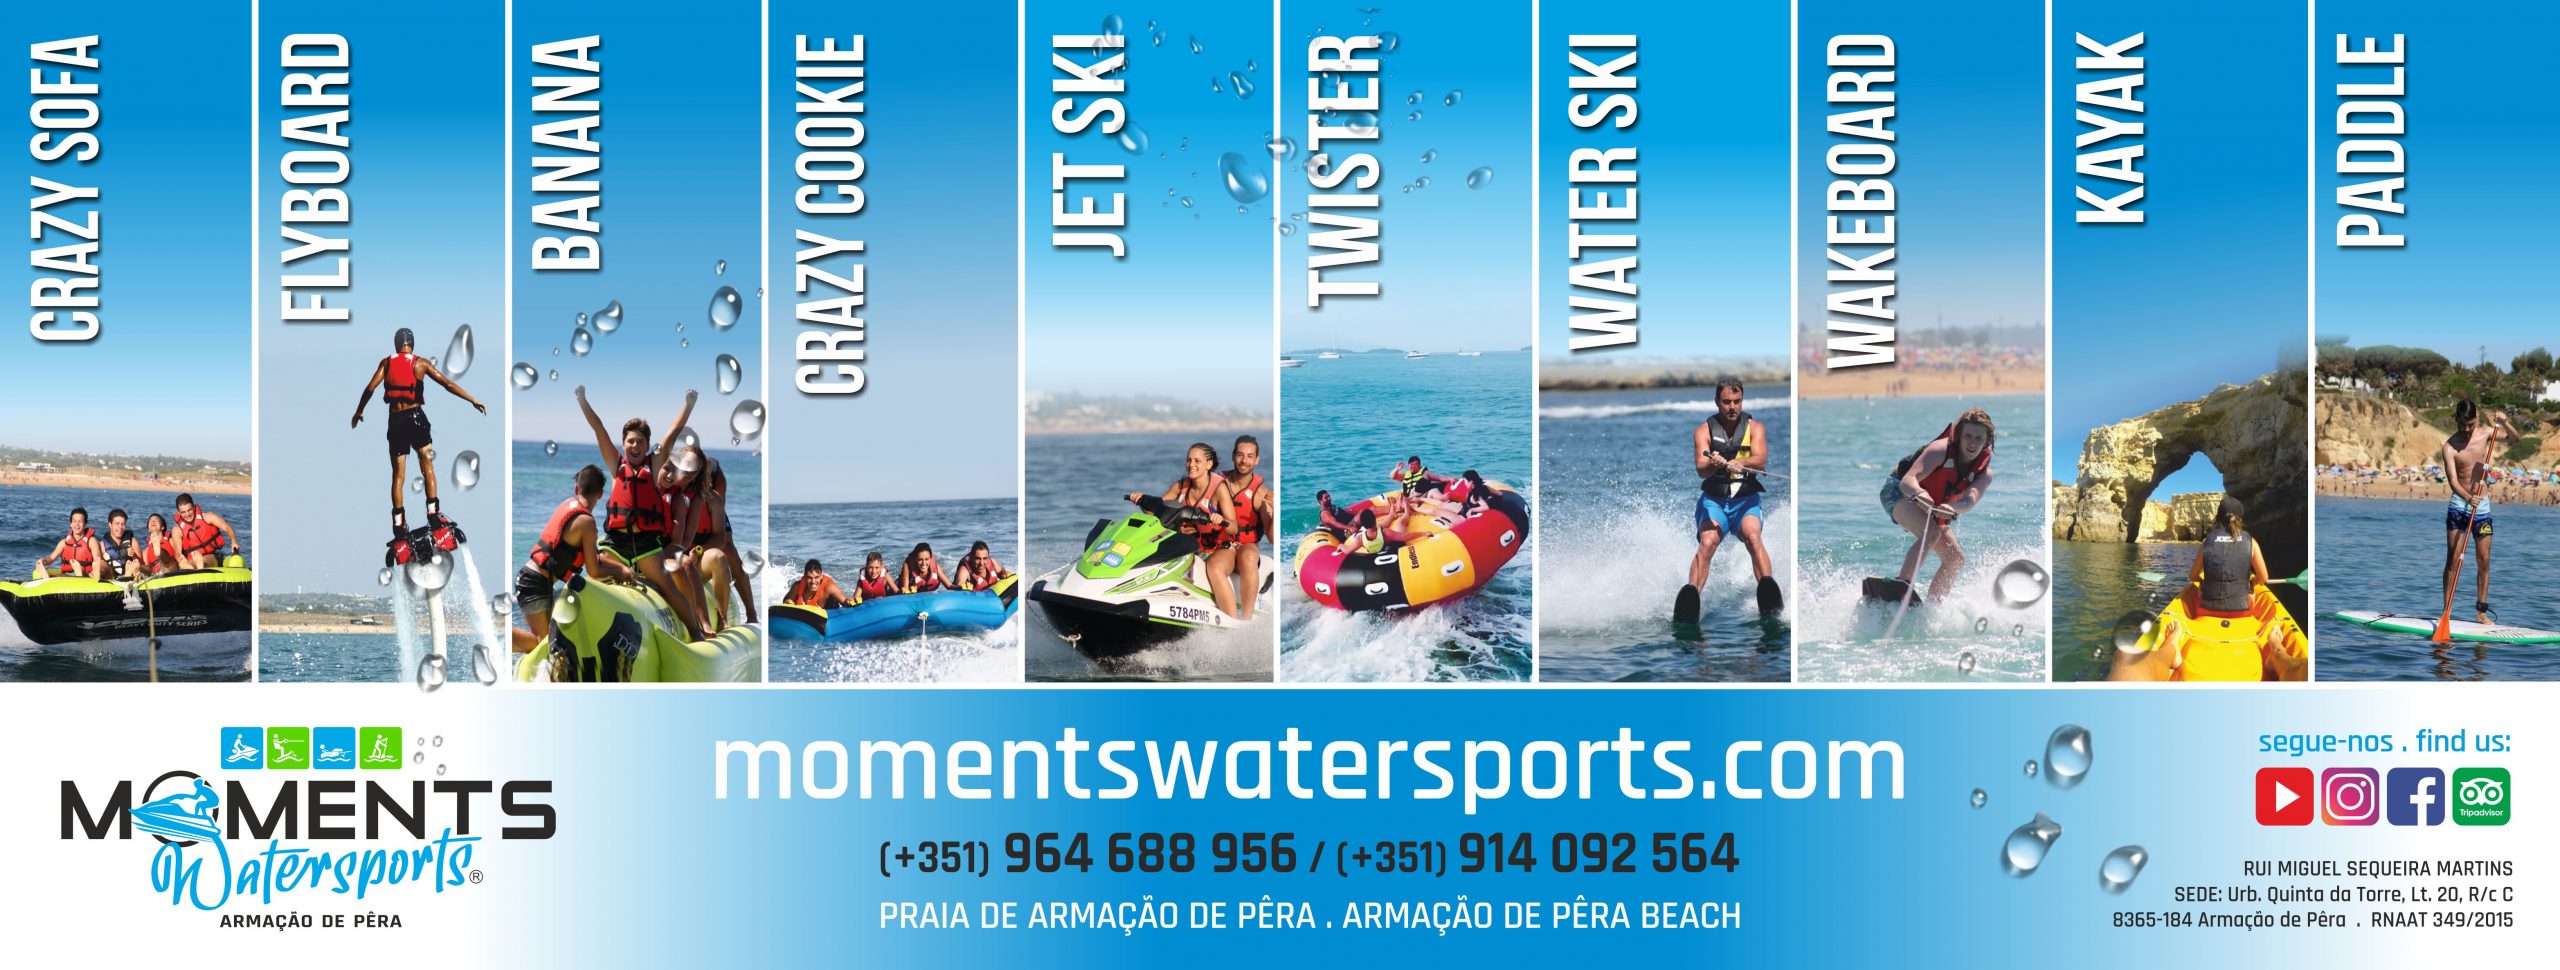 moments water sports banner